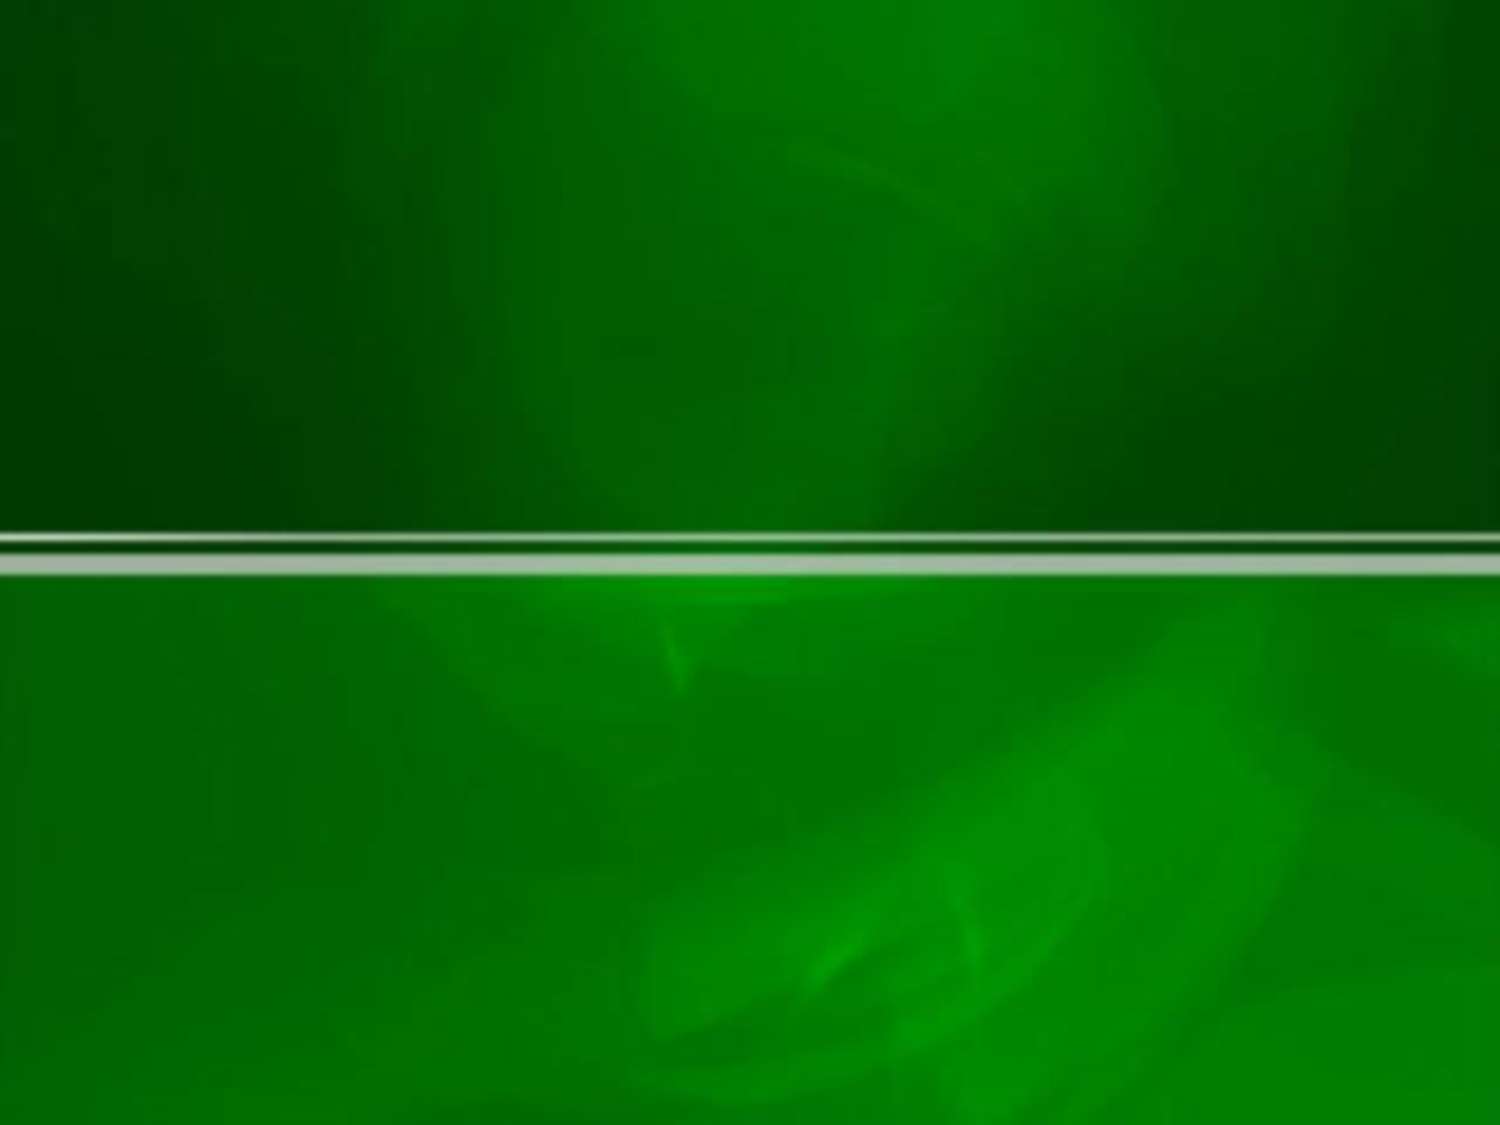 Free Green Photonic For PowerPoint  Abstract and Textures   Graphic